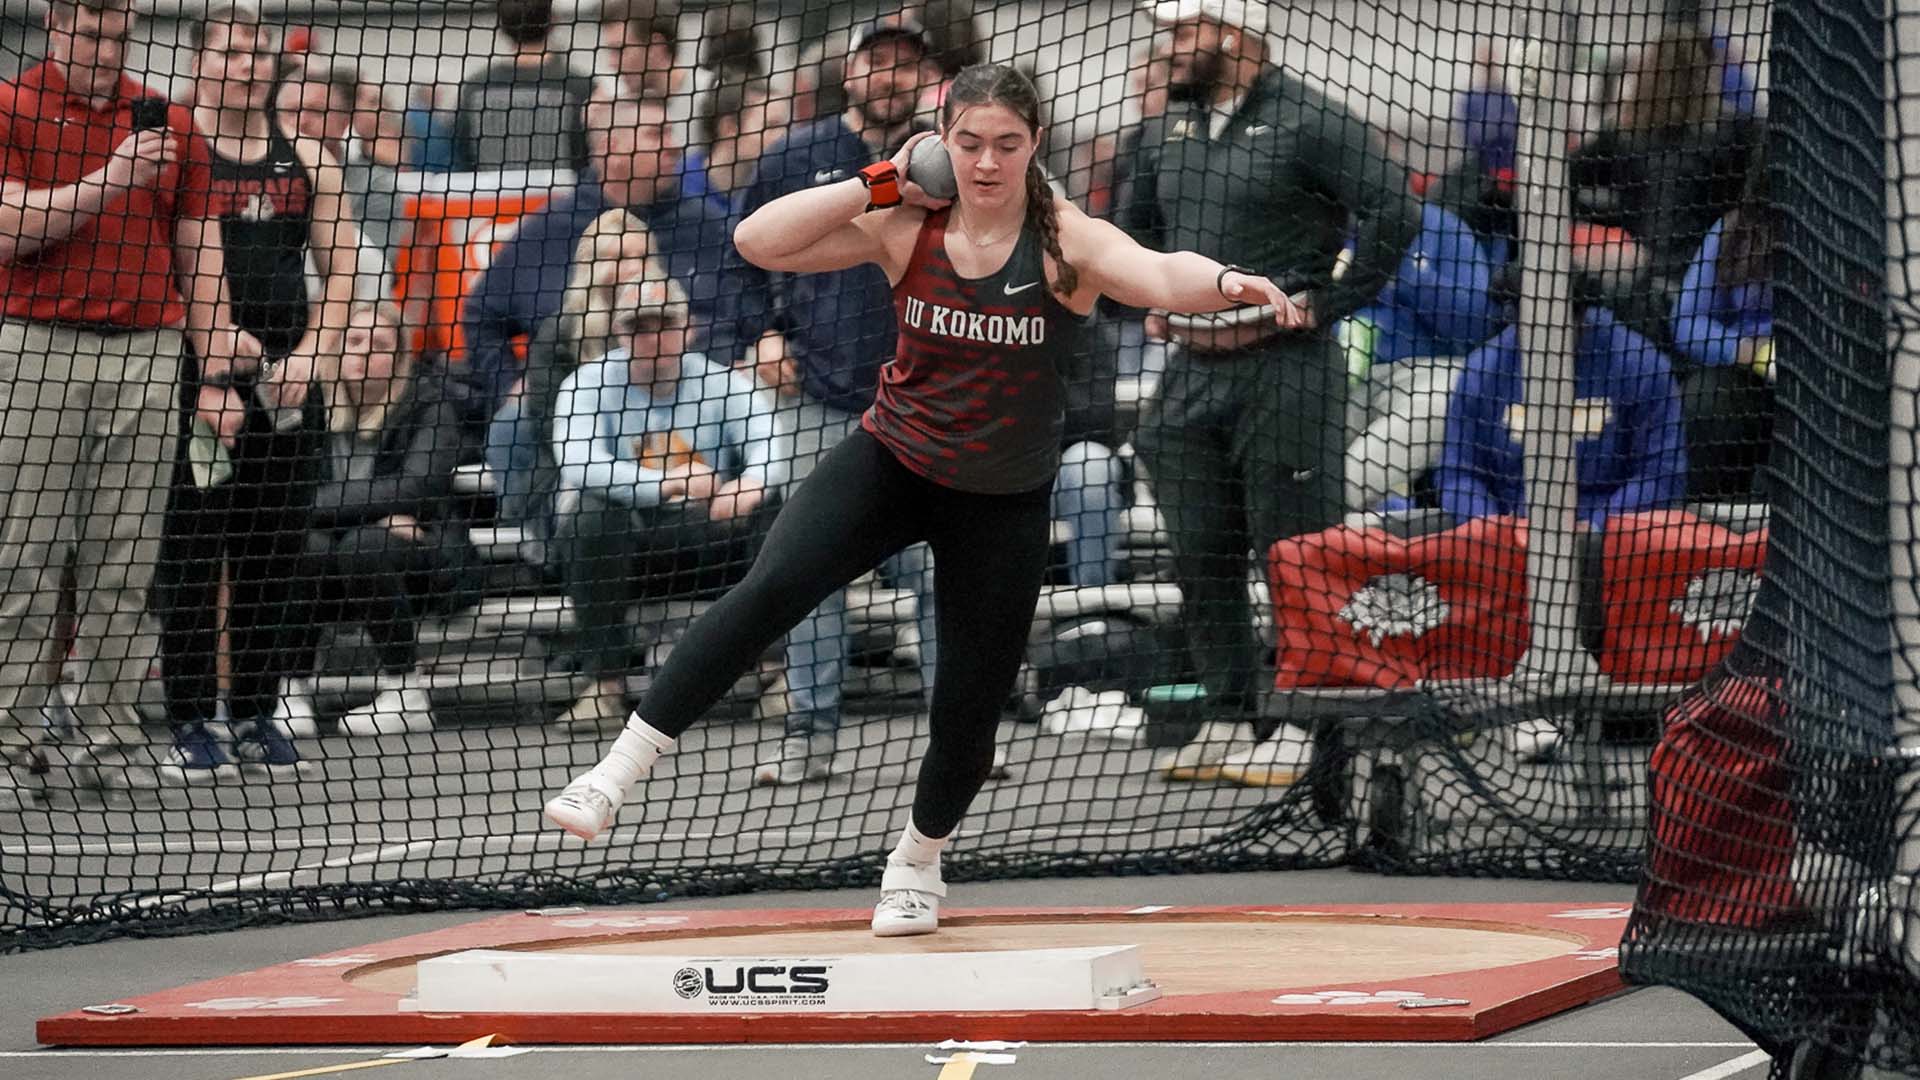 Duncan earns RSC Women's Indoor Field Athlete of the Week for second time